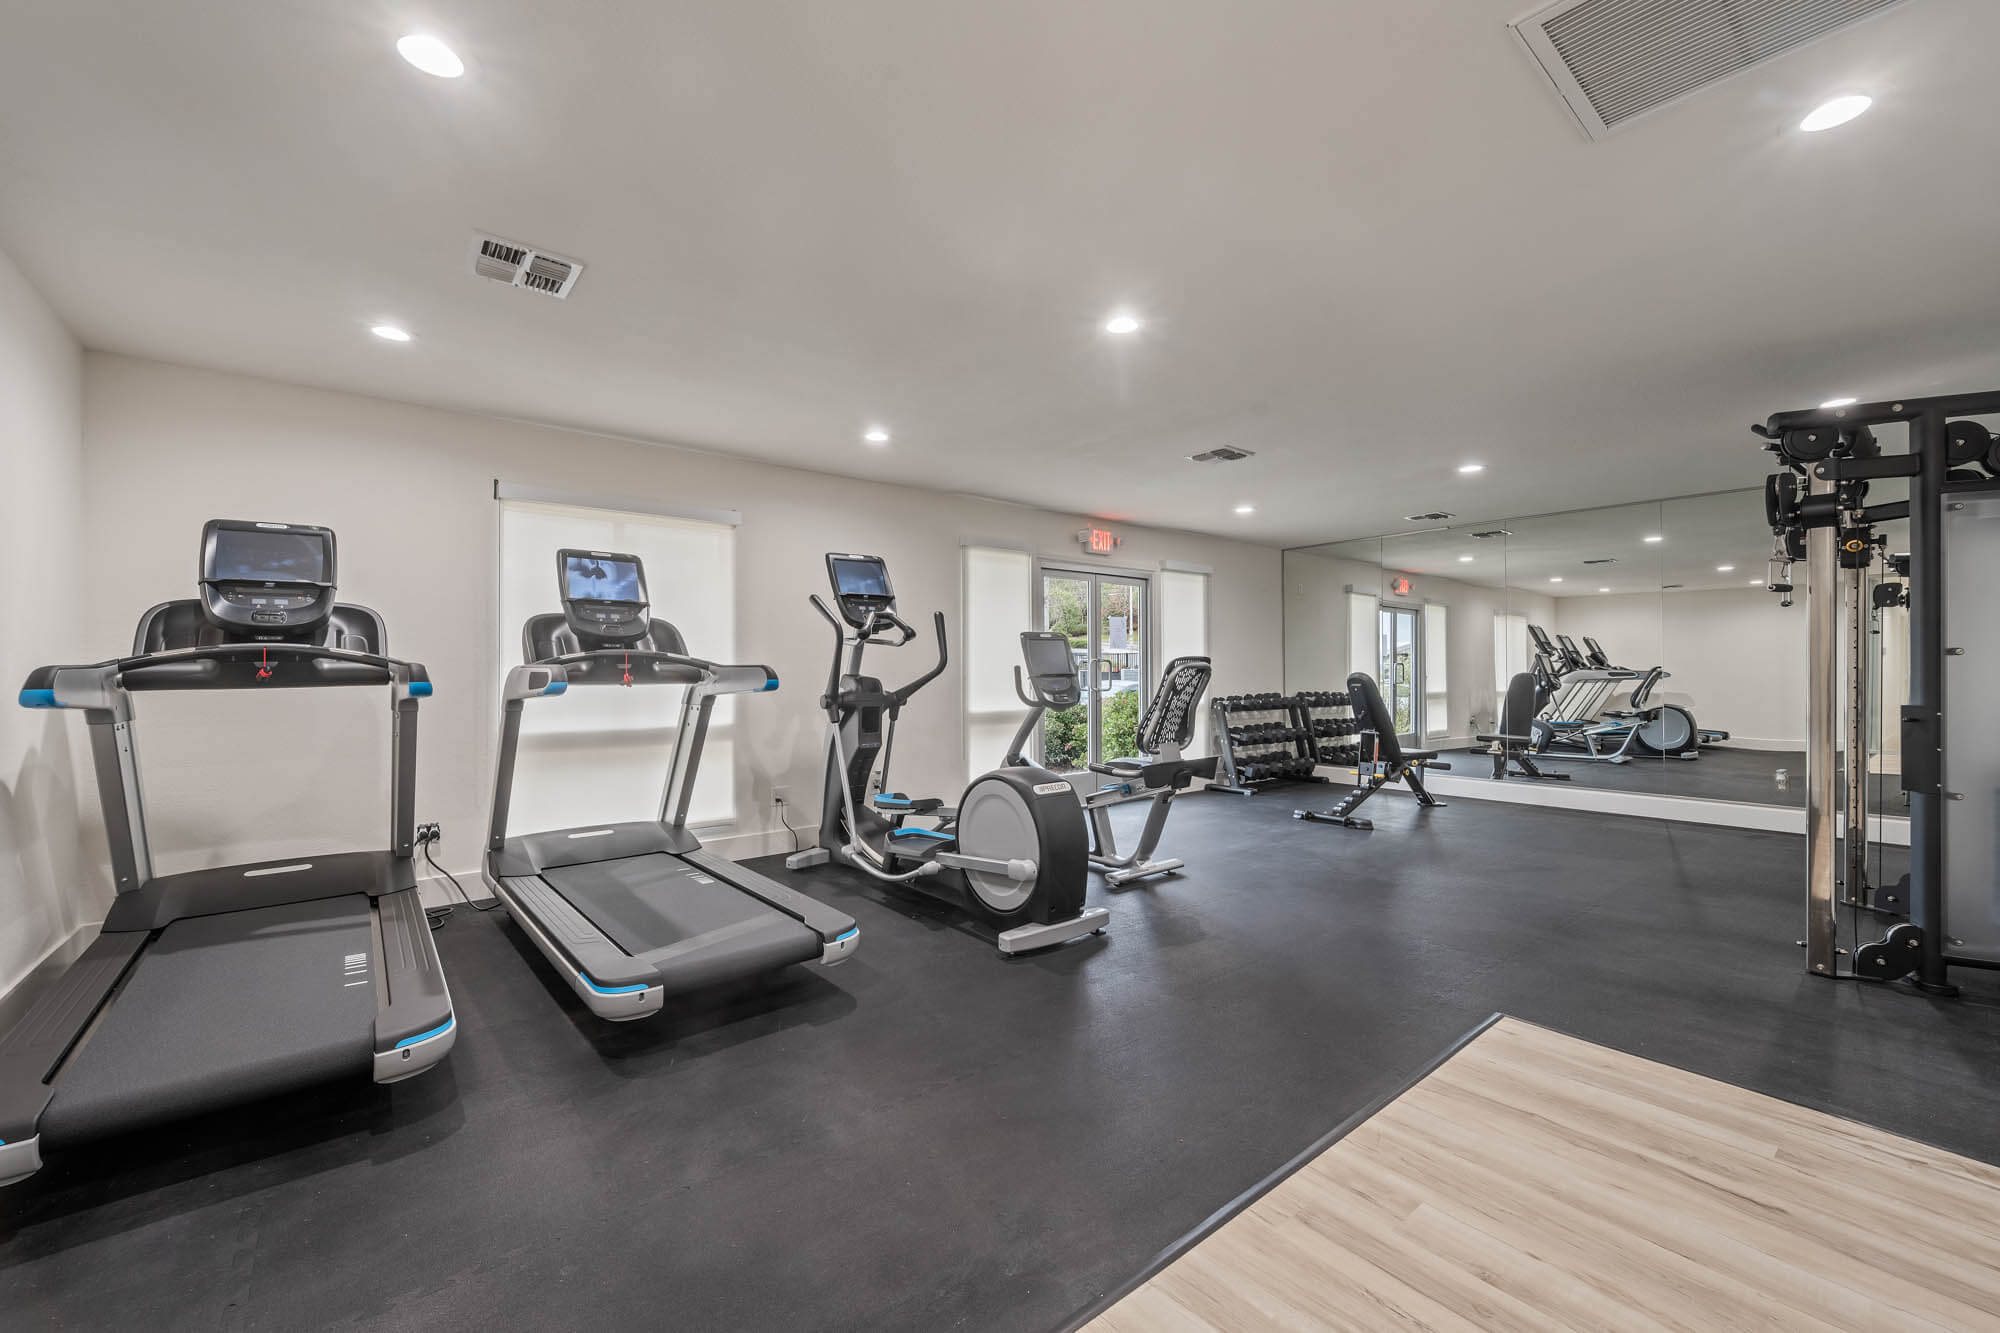 the gym is equipped with treadmills and other fitness equipment